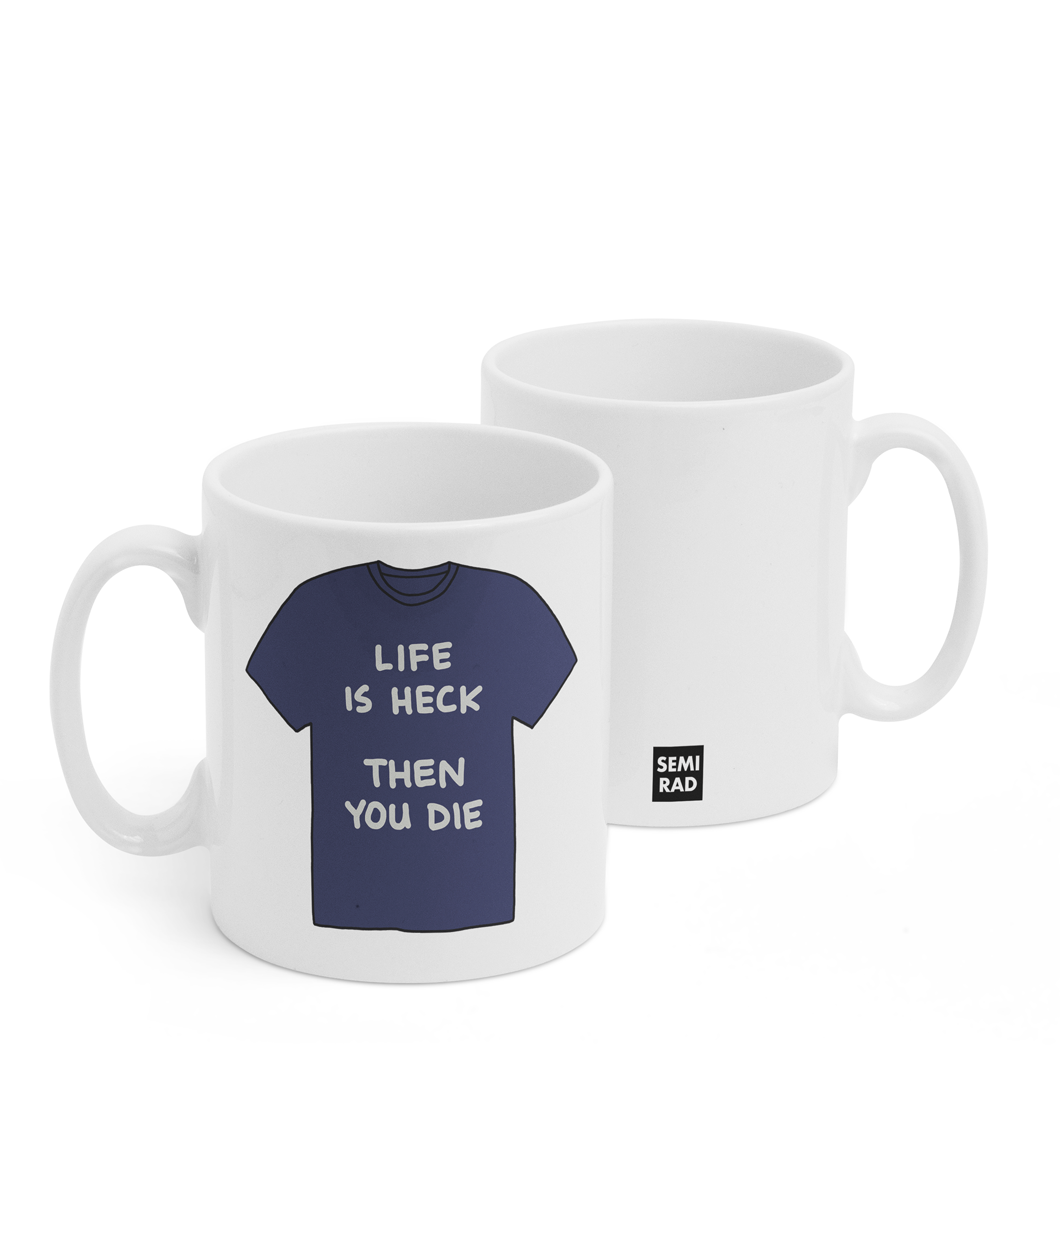 Two white mugs sitting next to each other showing two sides of the same mug. The front side has a drawing of a dark blue t-shirt with the text "Life is heck; then you die" written across it. On the back of the mug is a small black square with the words "Semi Rad".